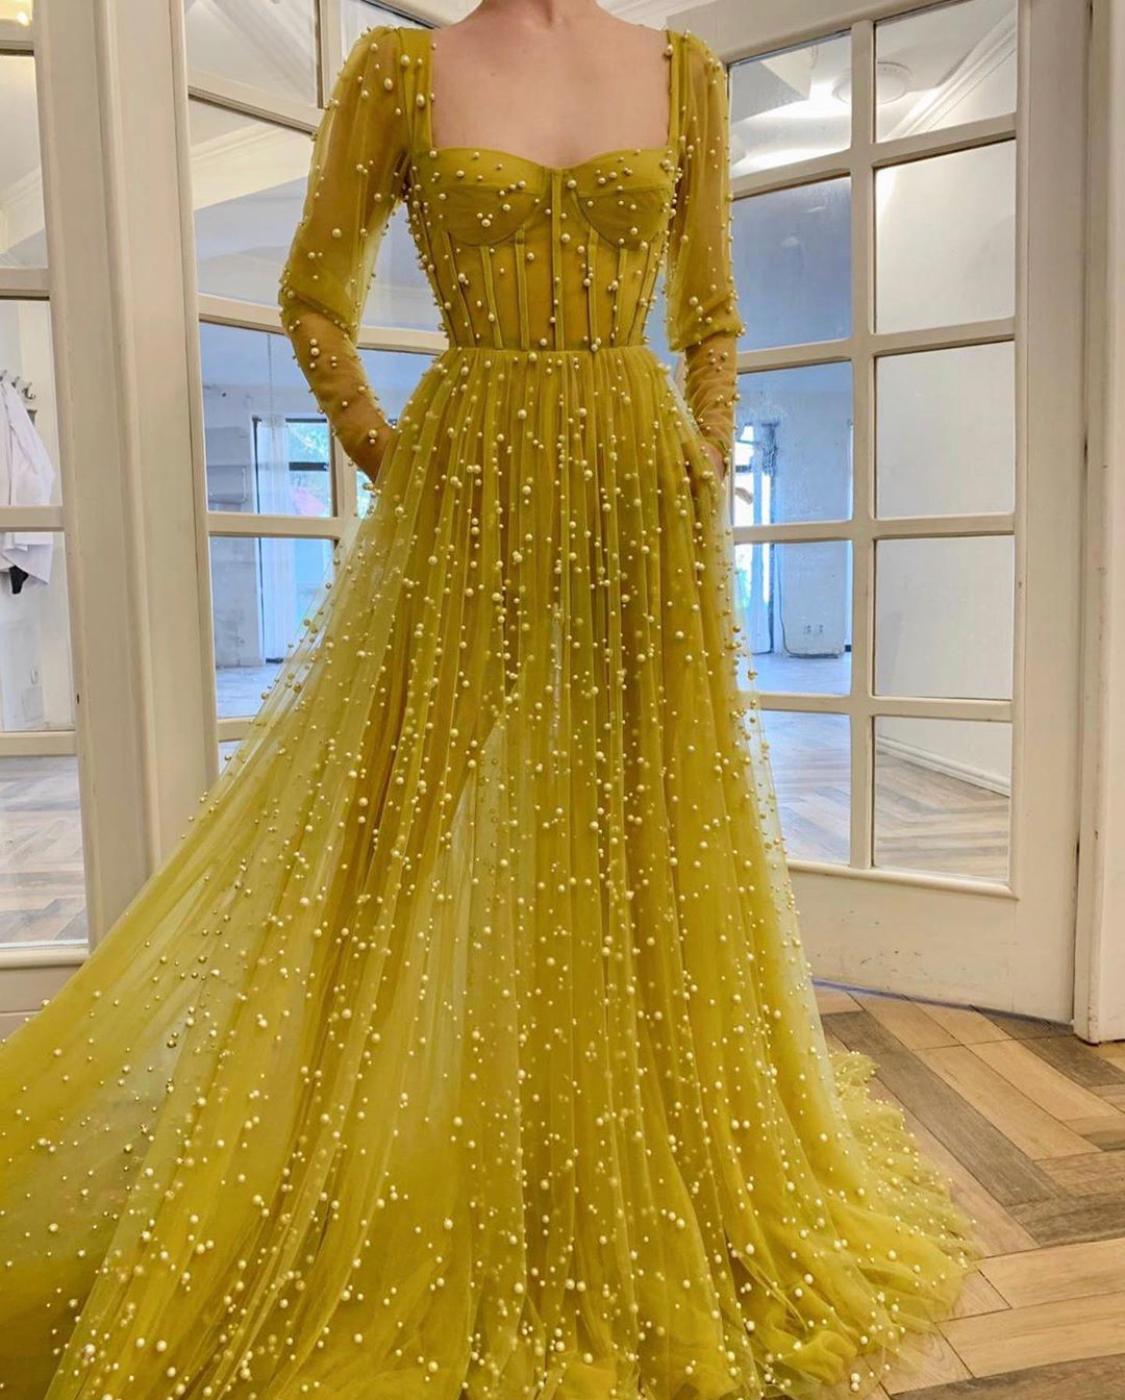 Yellow A-Line dress with long sleeves and beading